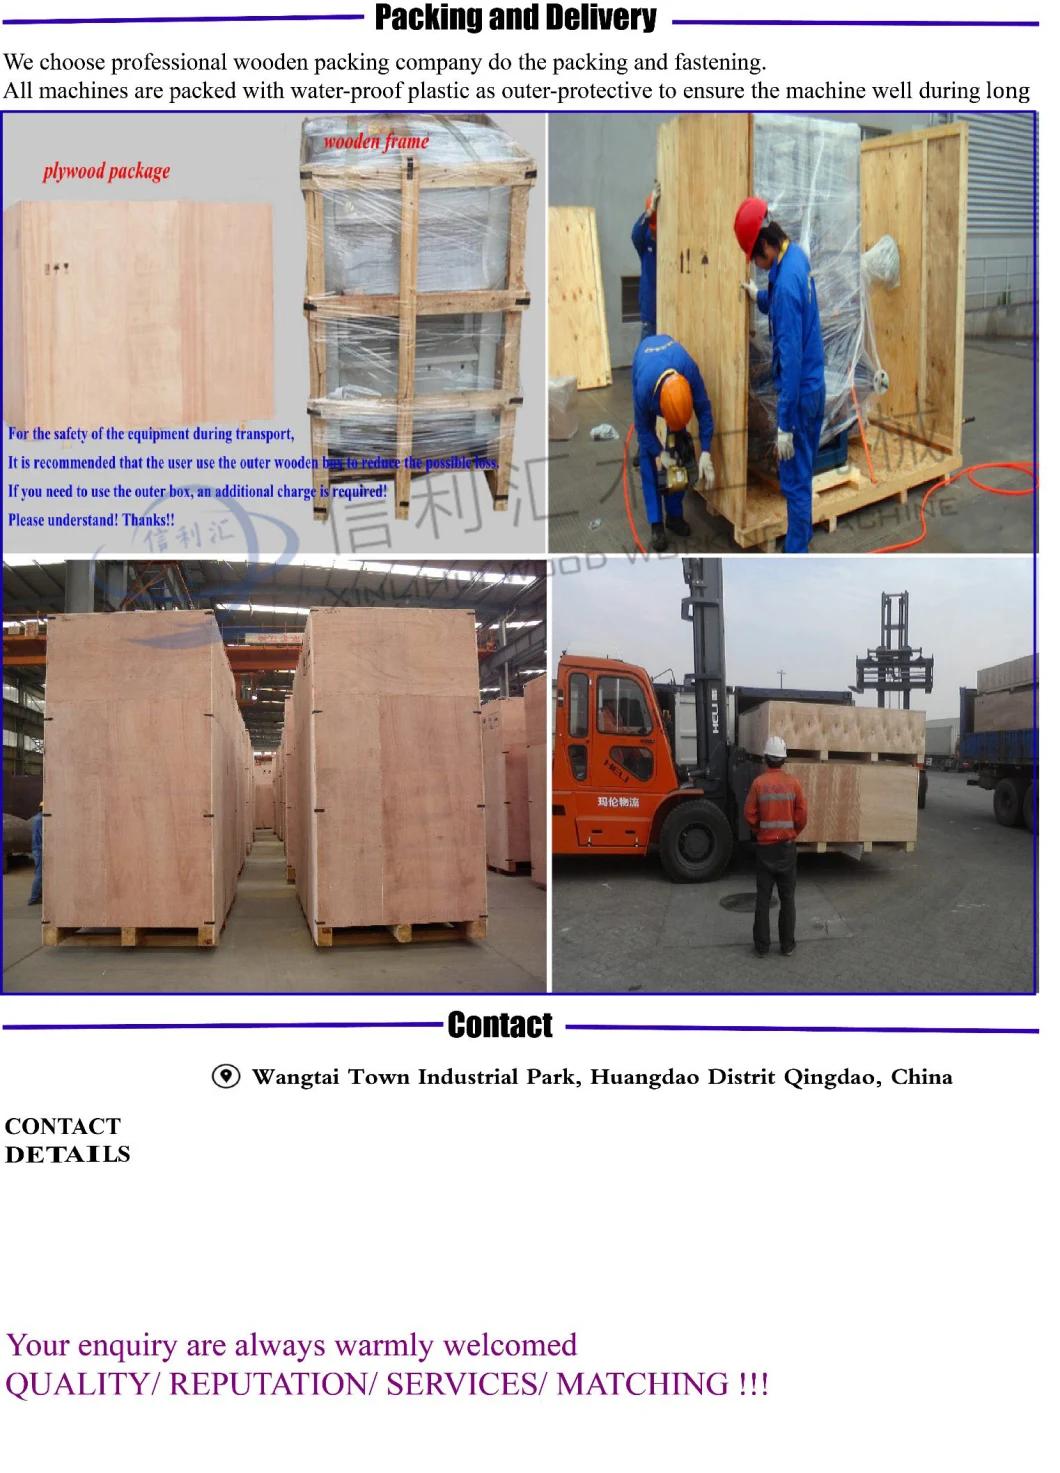 Big Core Hot Press Full Automatic Machine Four Side Pressure Joinery Board Assembly Machine Specializing in The Production of Ecological Board Core